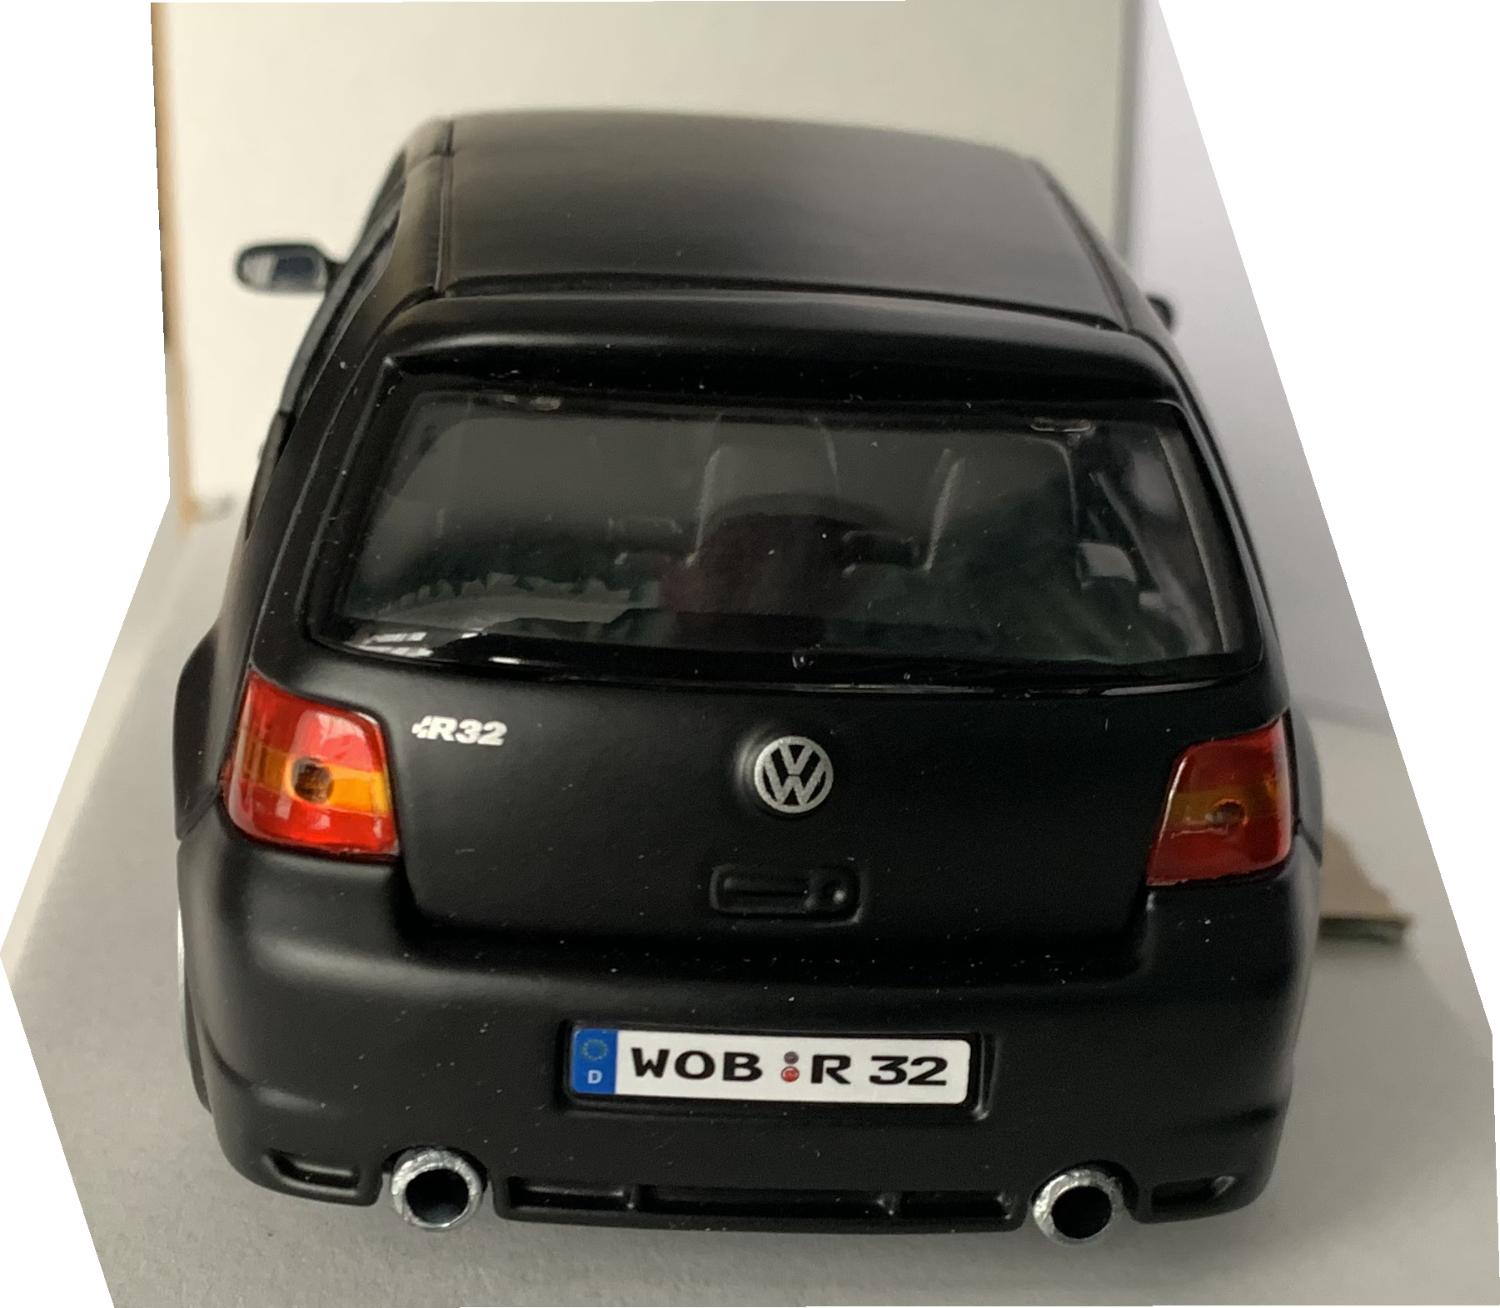 A good reproduction of the VW Golf R32 detail throughout, all authentically recreated. The model is presented in a window display box, the car is approx. 17 cm long and the presentation box is 23 cm long